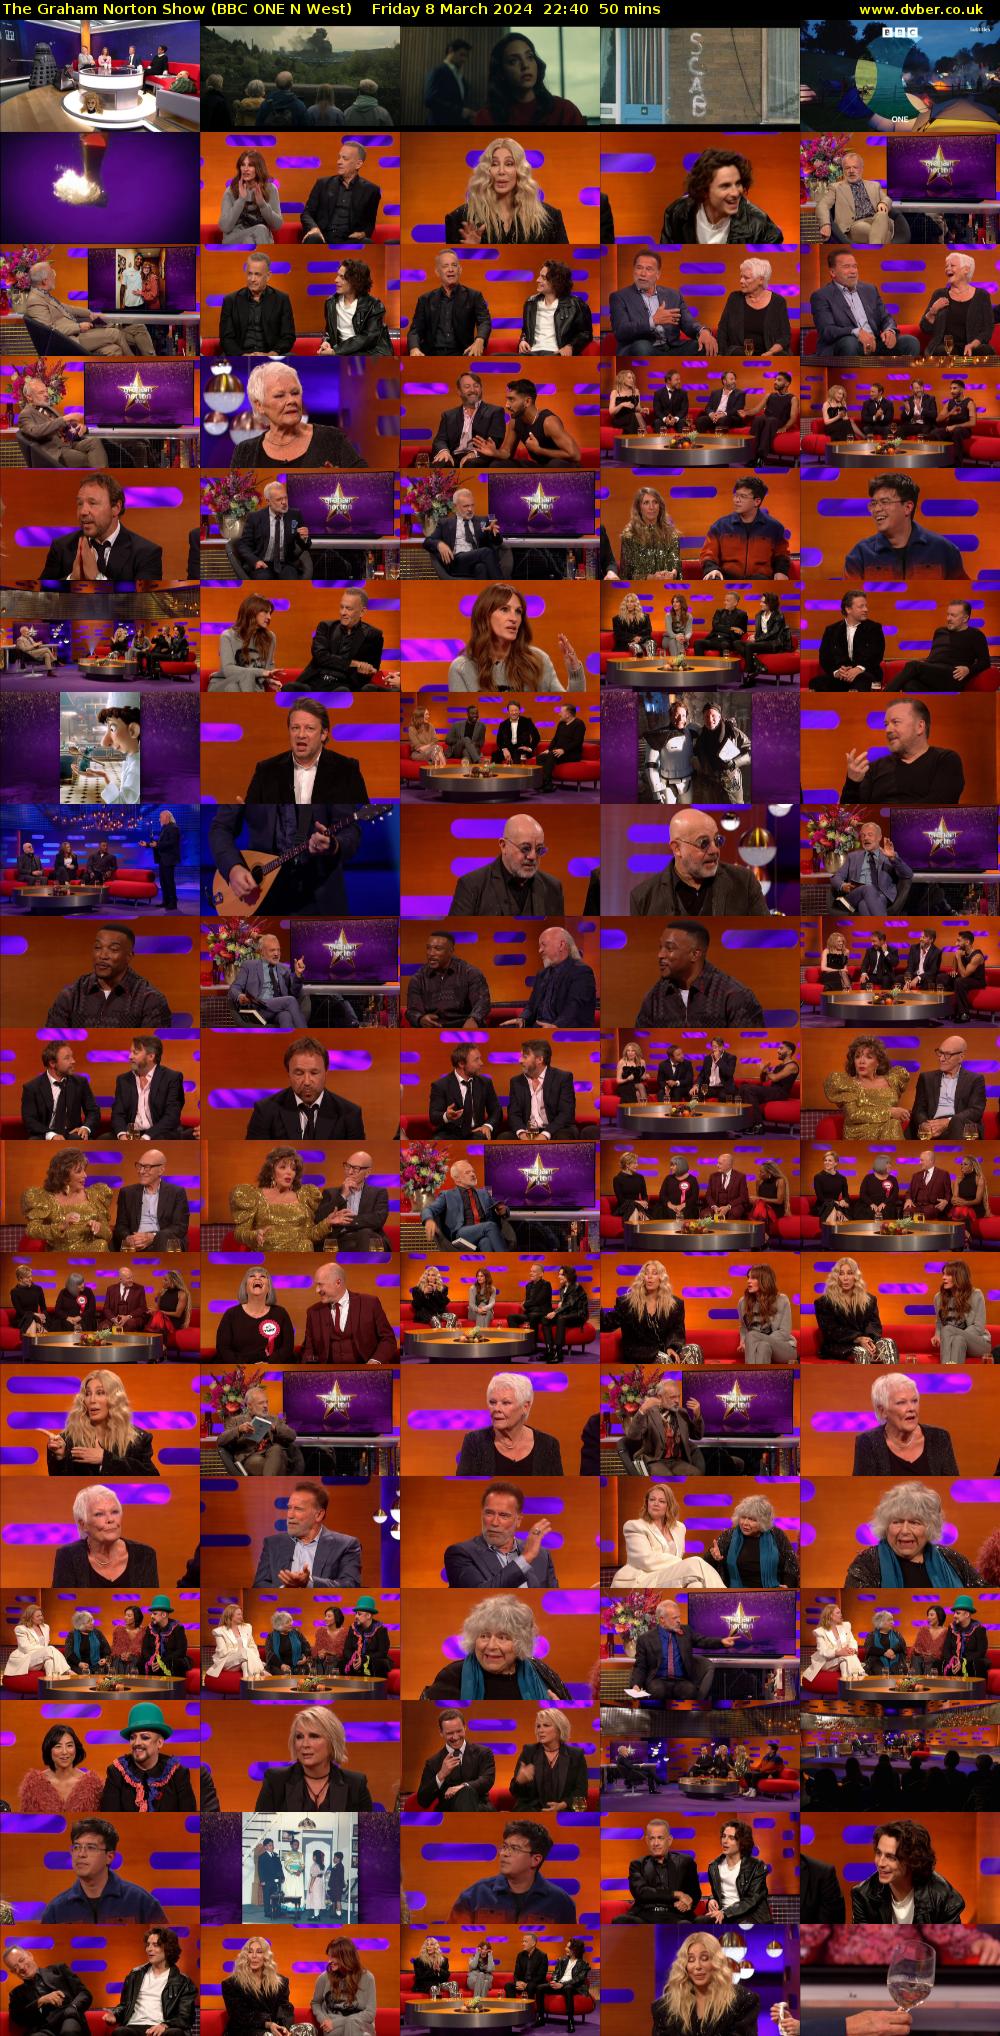 The Graham Norton Show (BBC ONE N West) Friday 8 March 2024 22:40 - 23:30